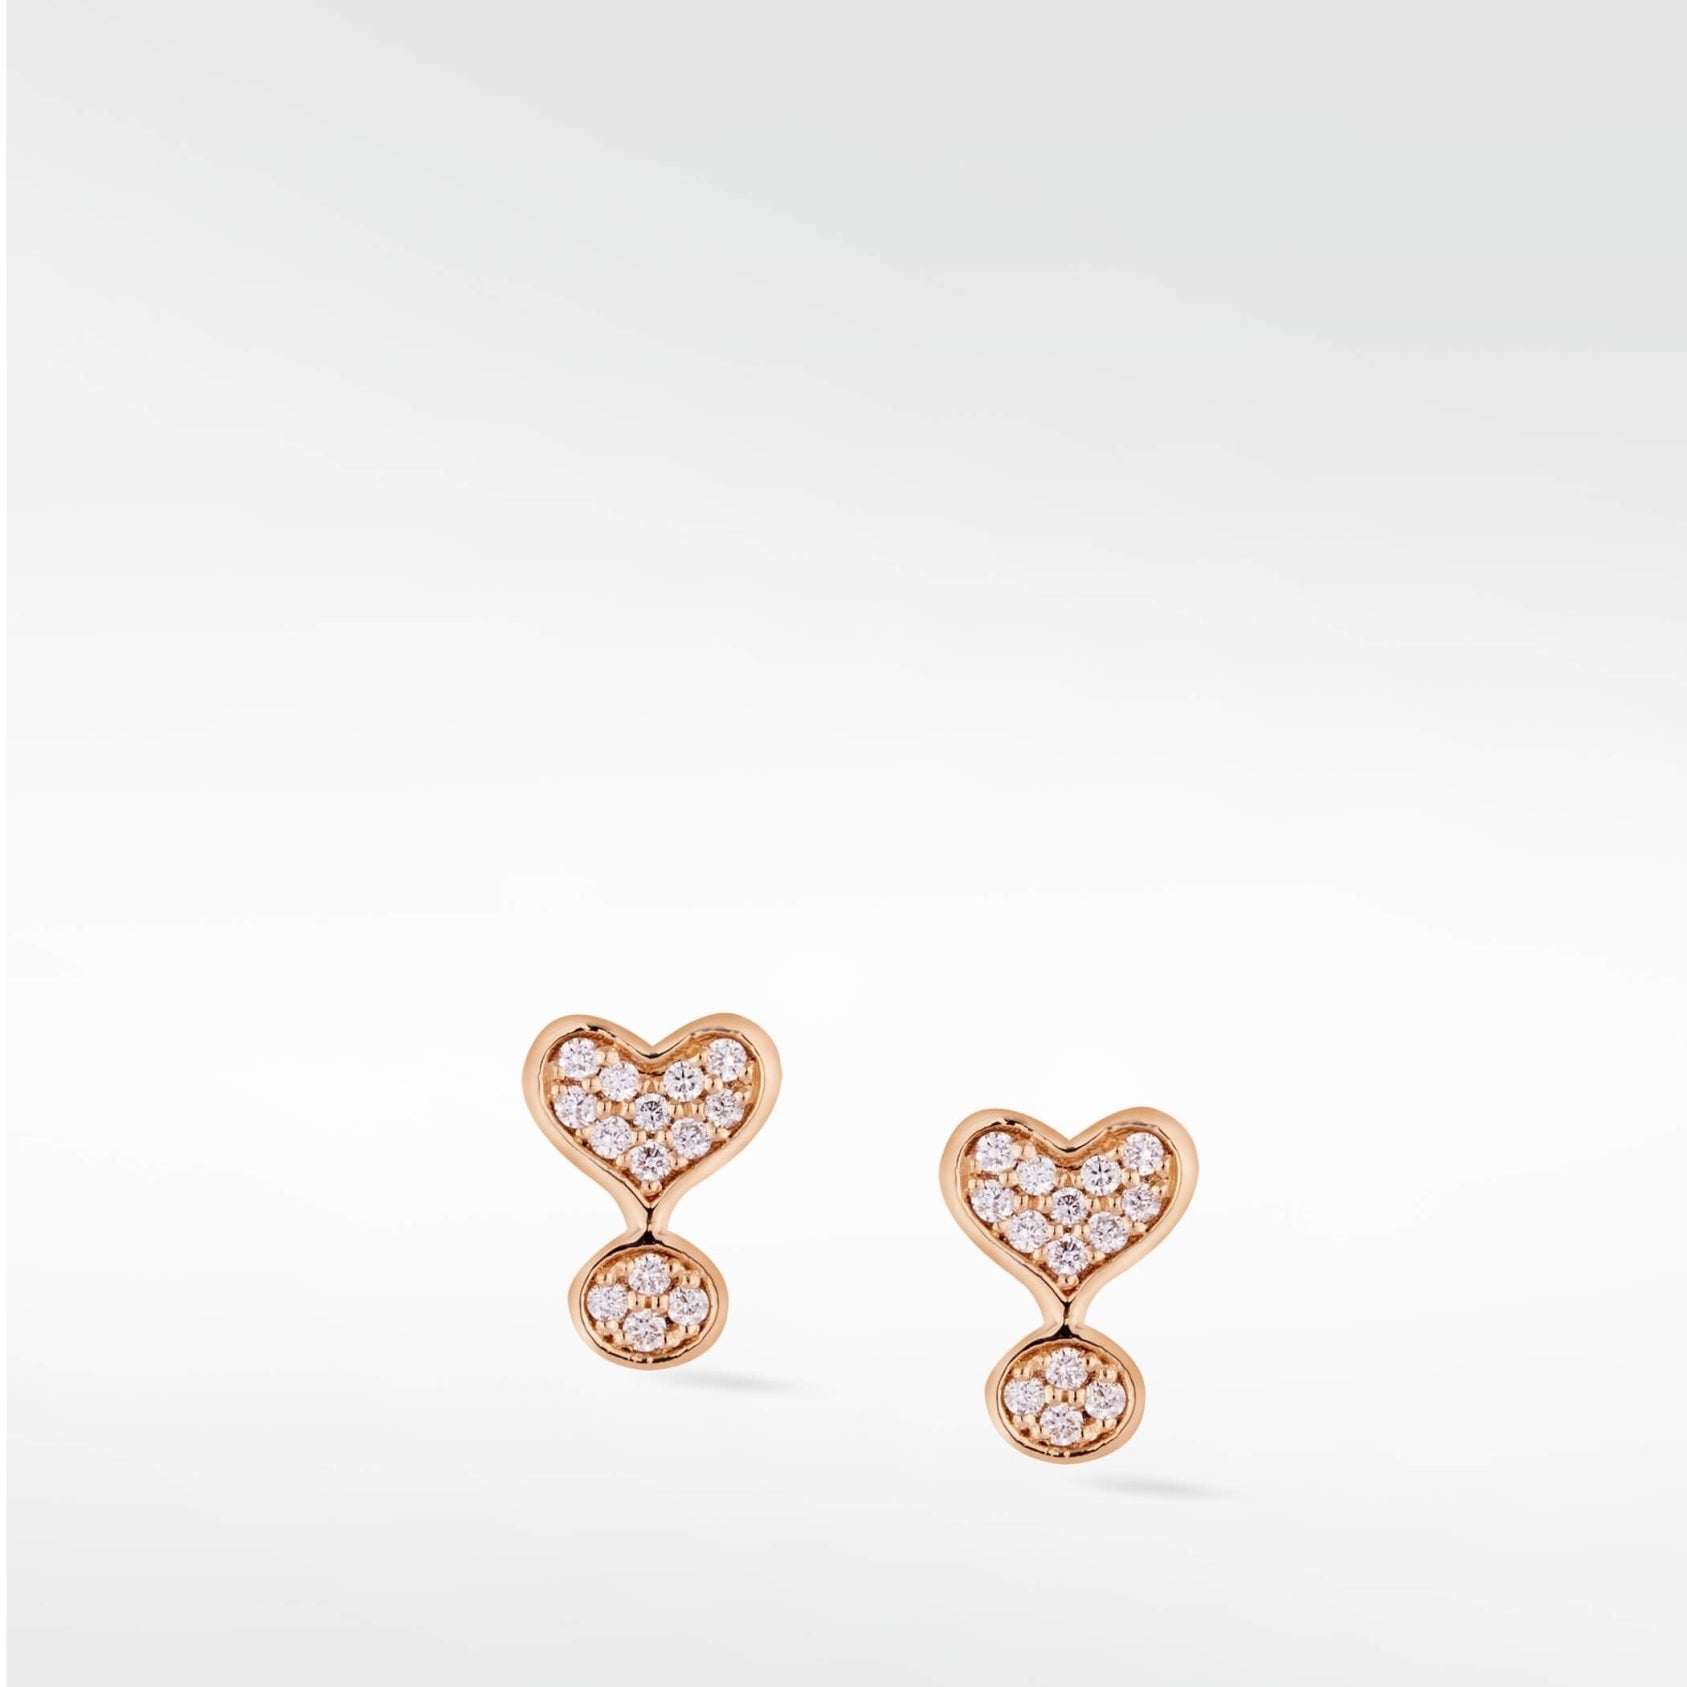 Exclamation Diamond PavŽ Stud Earrings in Solid 14K Gold - Lark and Berry